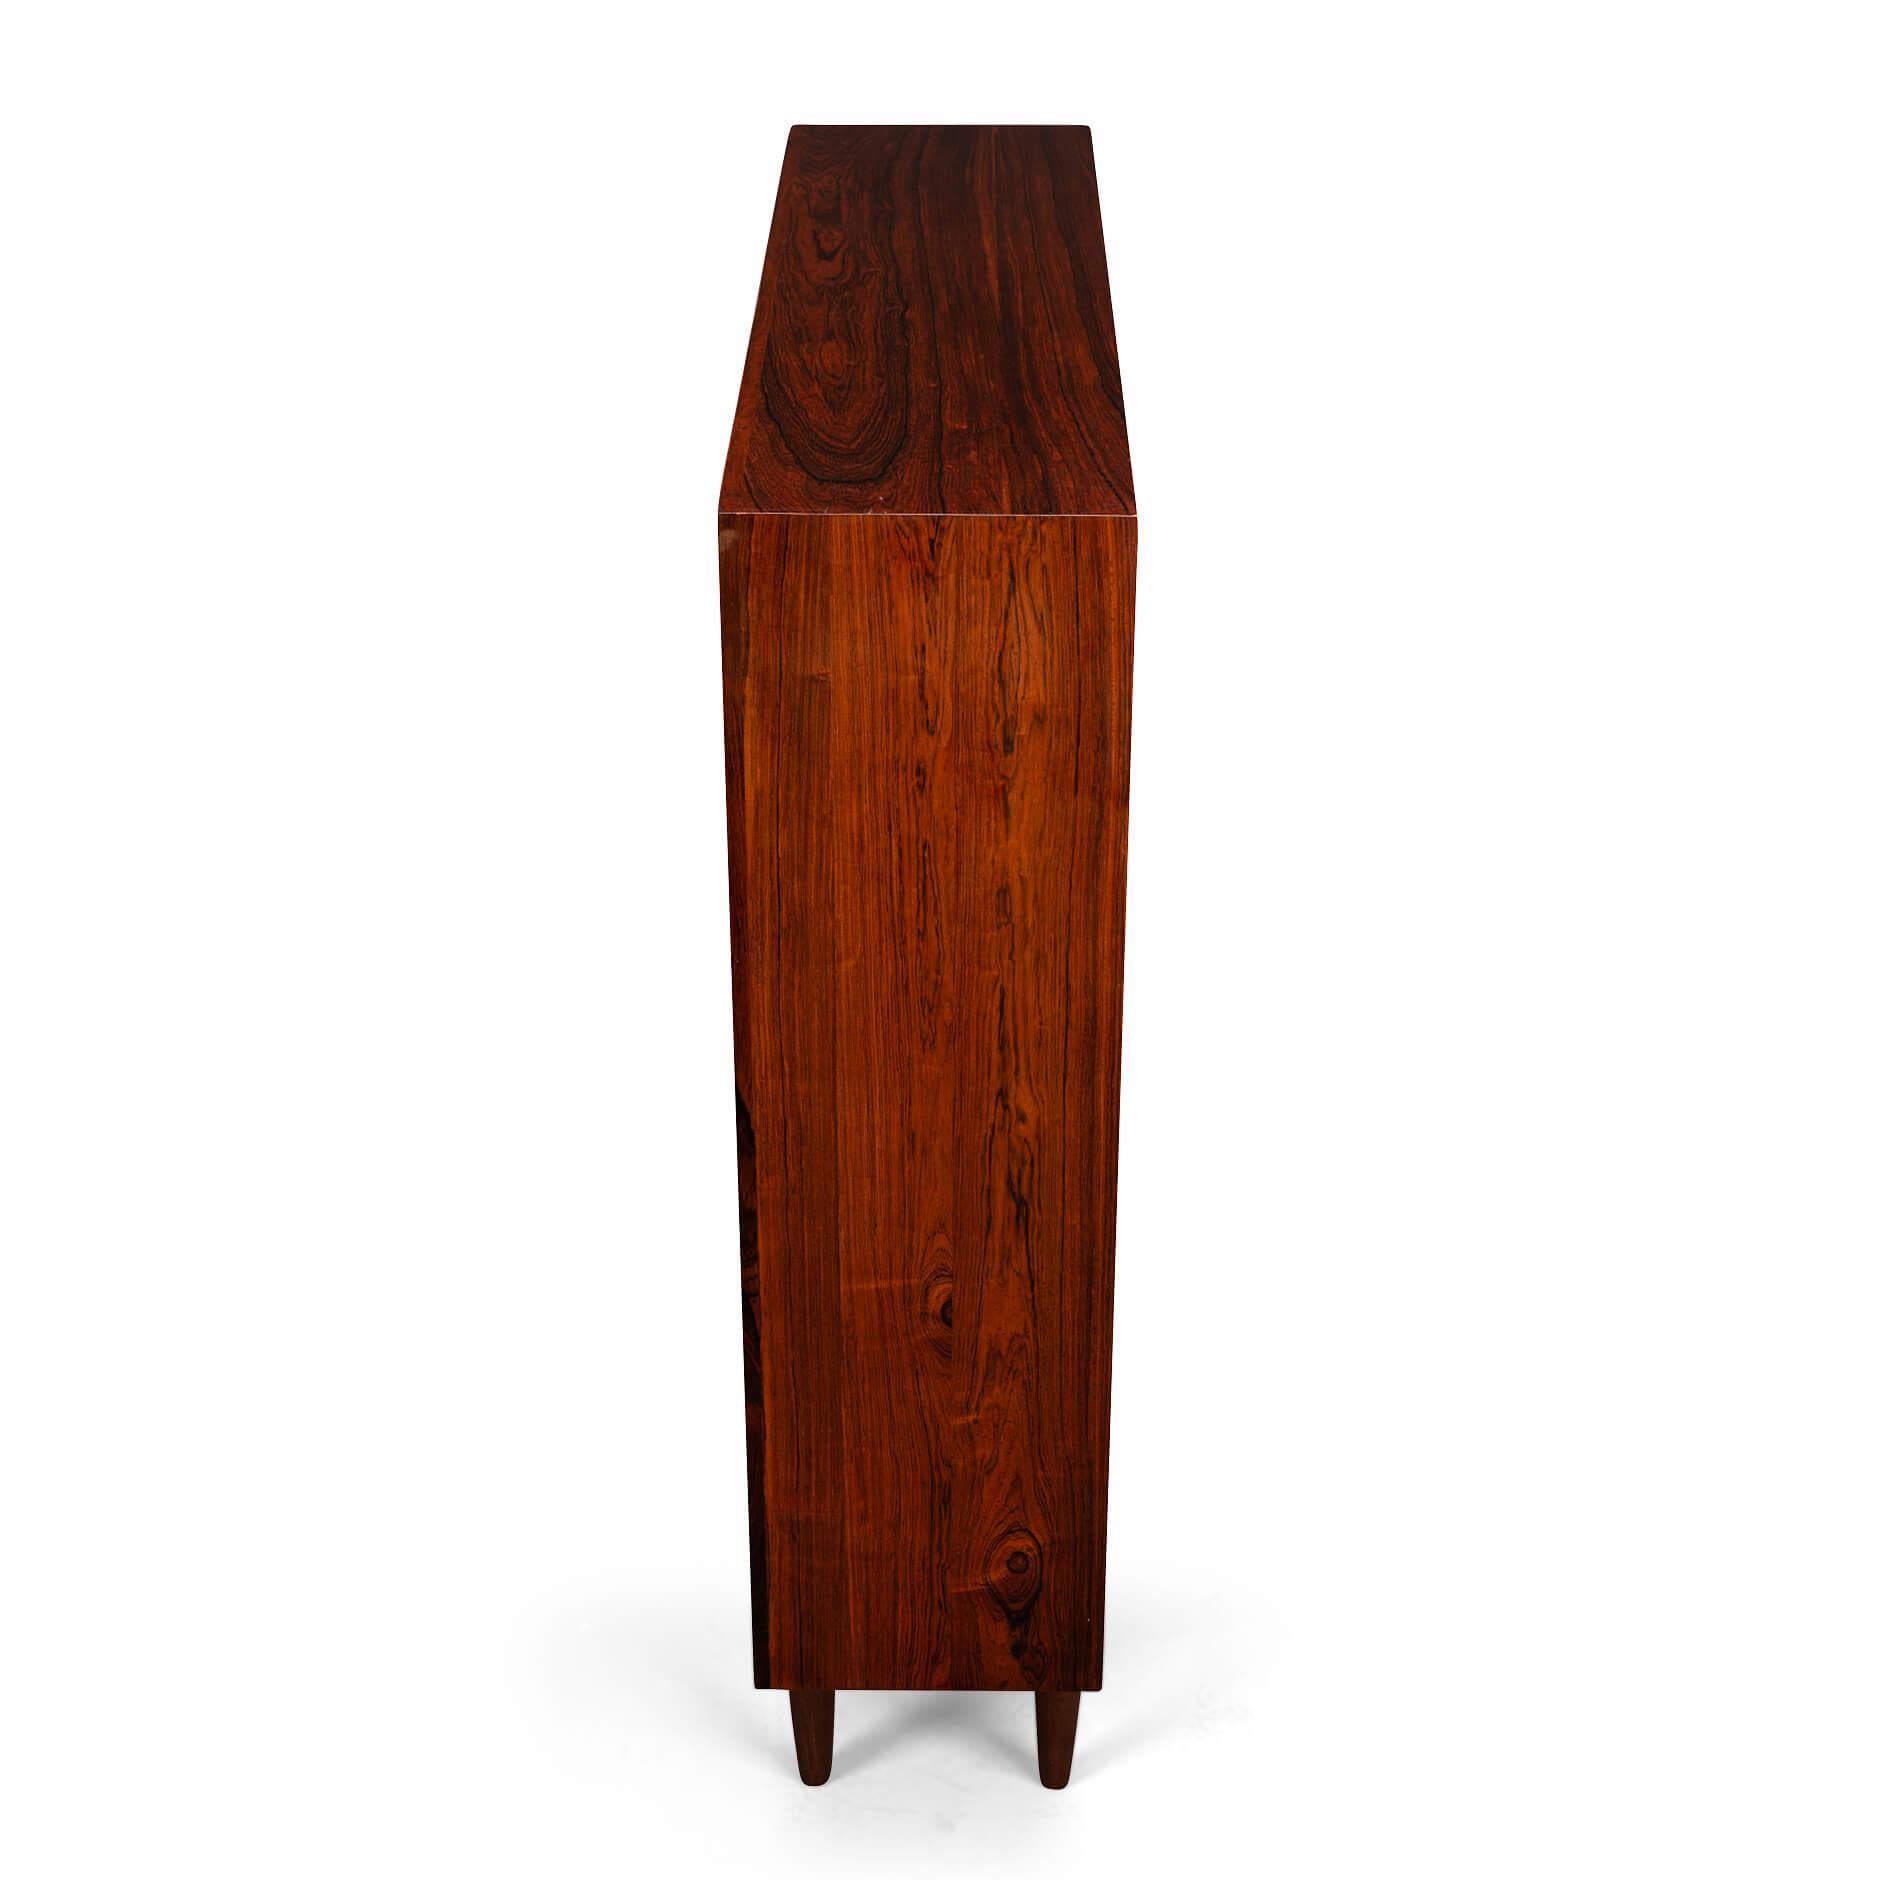 Mid-Century Modern Danish Design Rosewood Bookcase made by Nexo, 1960s For Sale